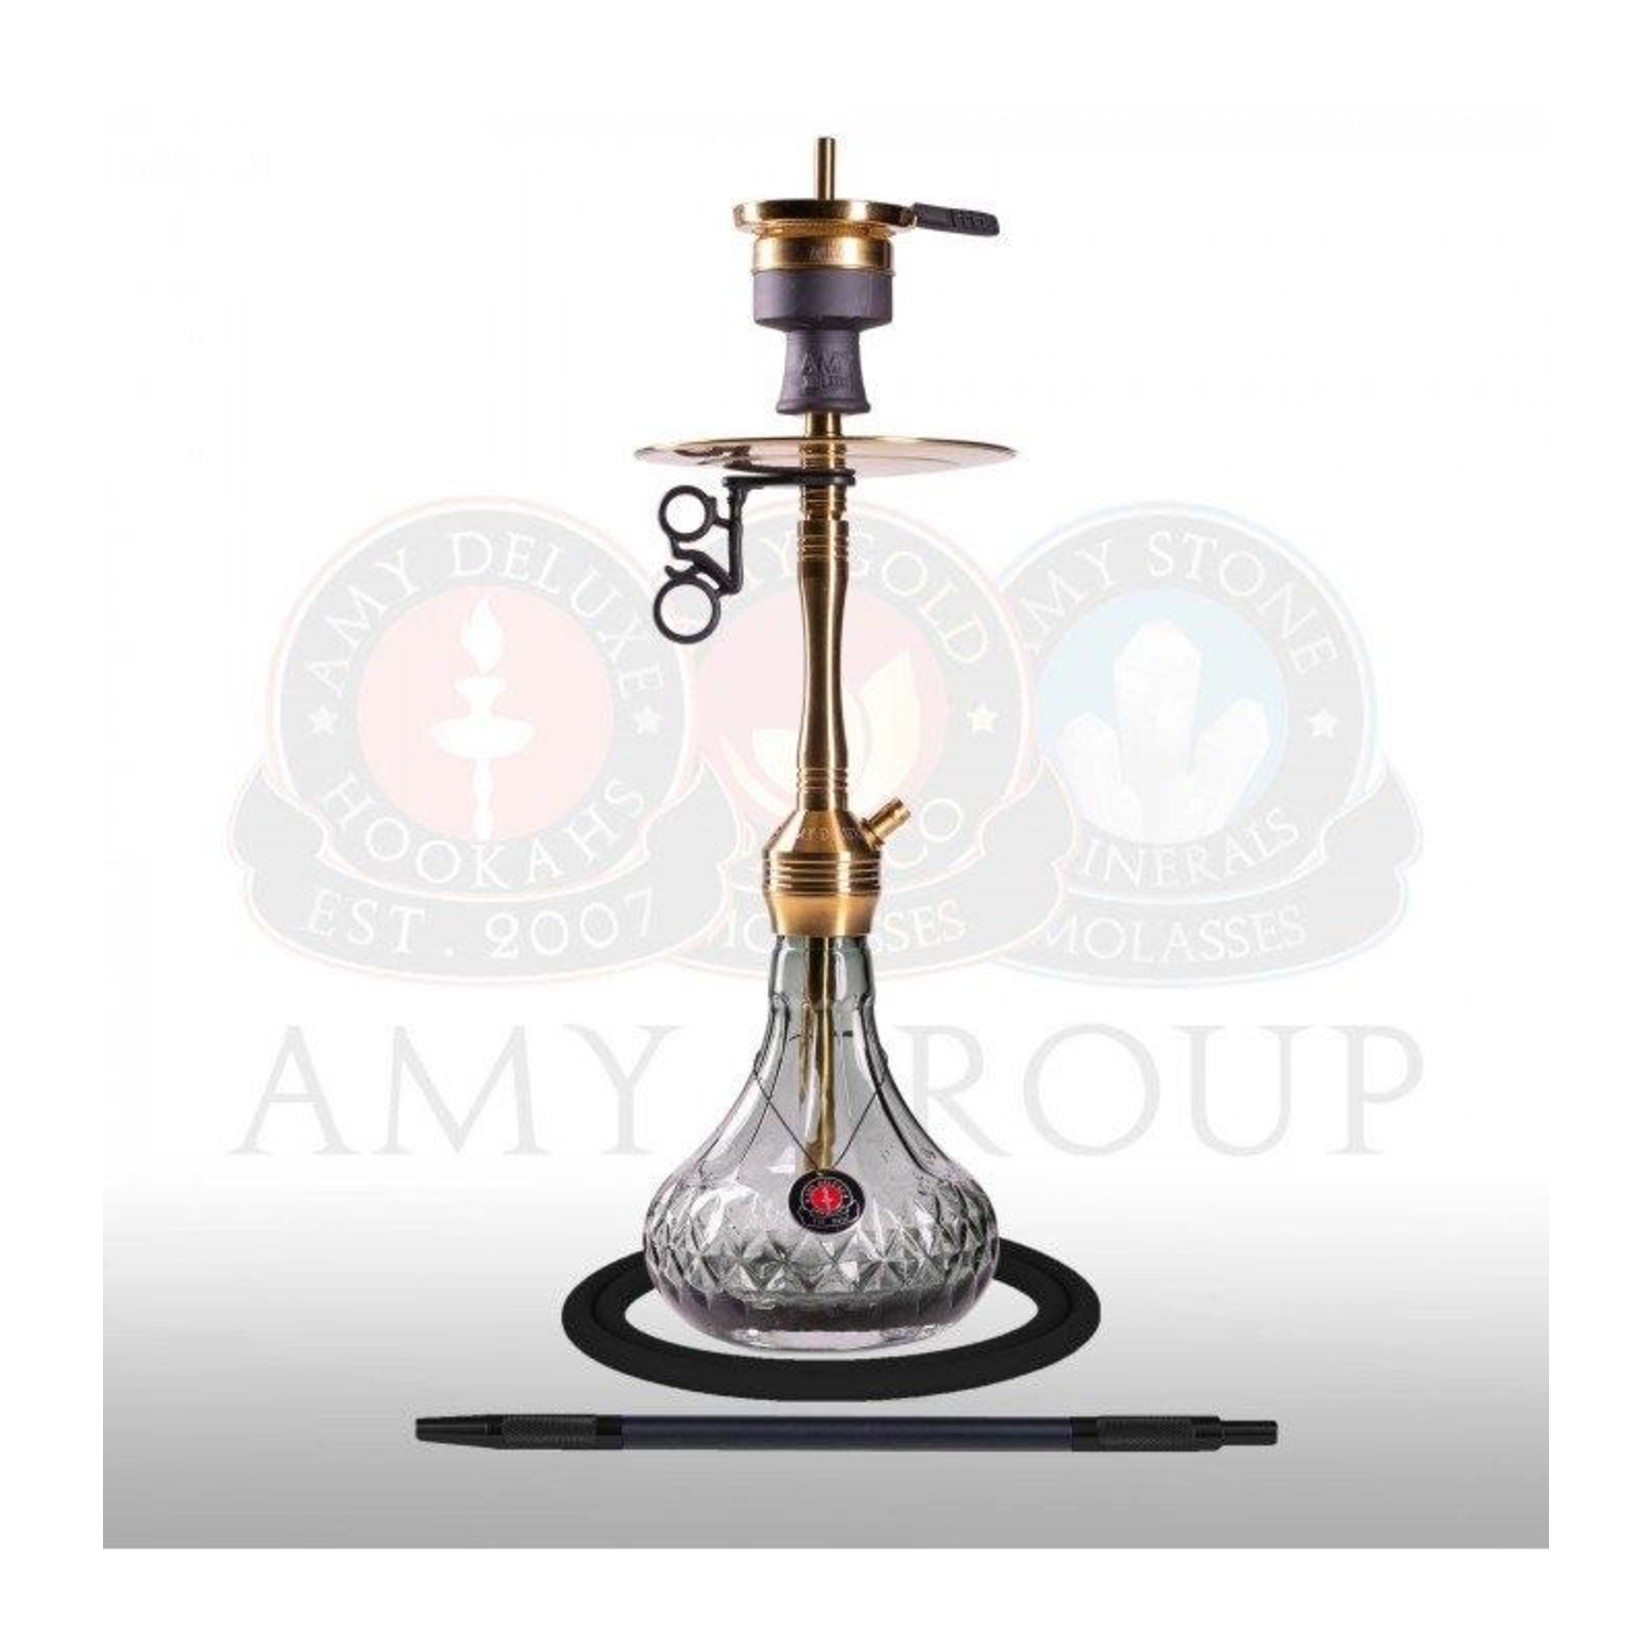 Amy Deluxe Amy Deluxe Amy Xpress Fame S SS29.02 Hookah